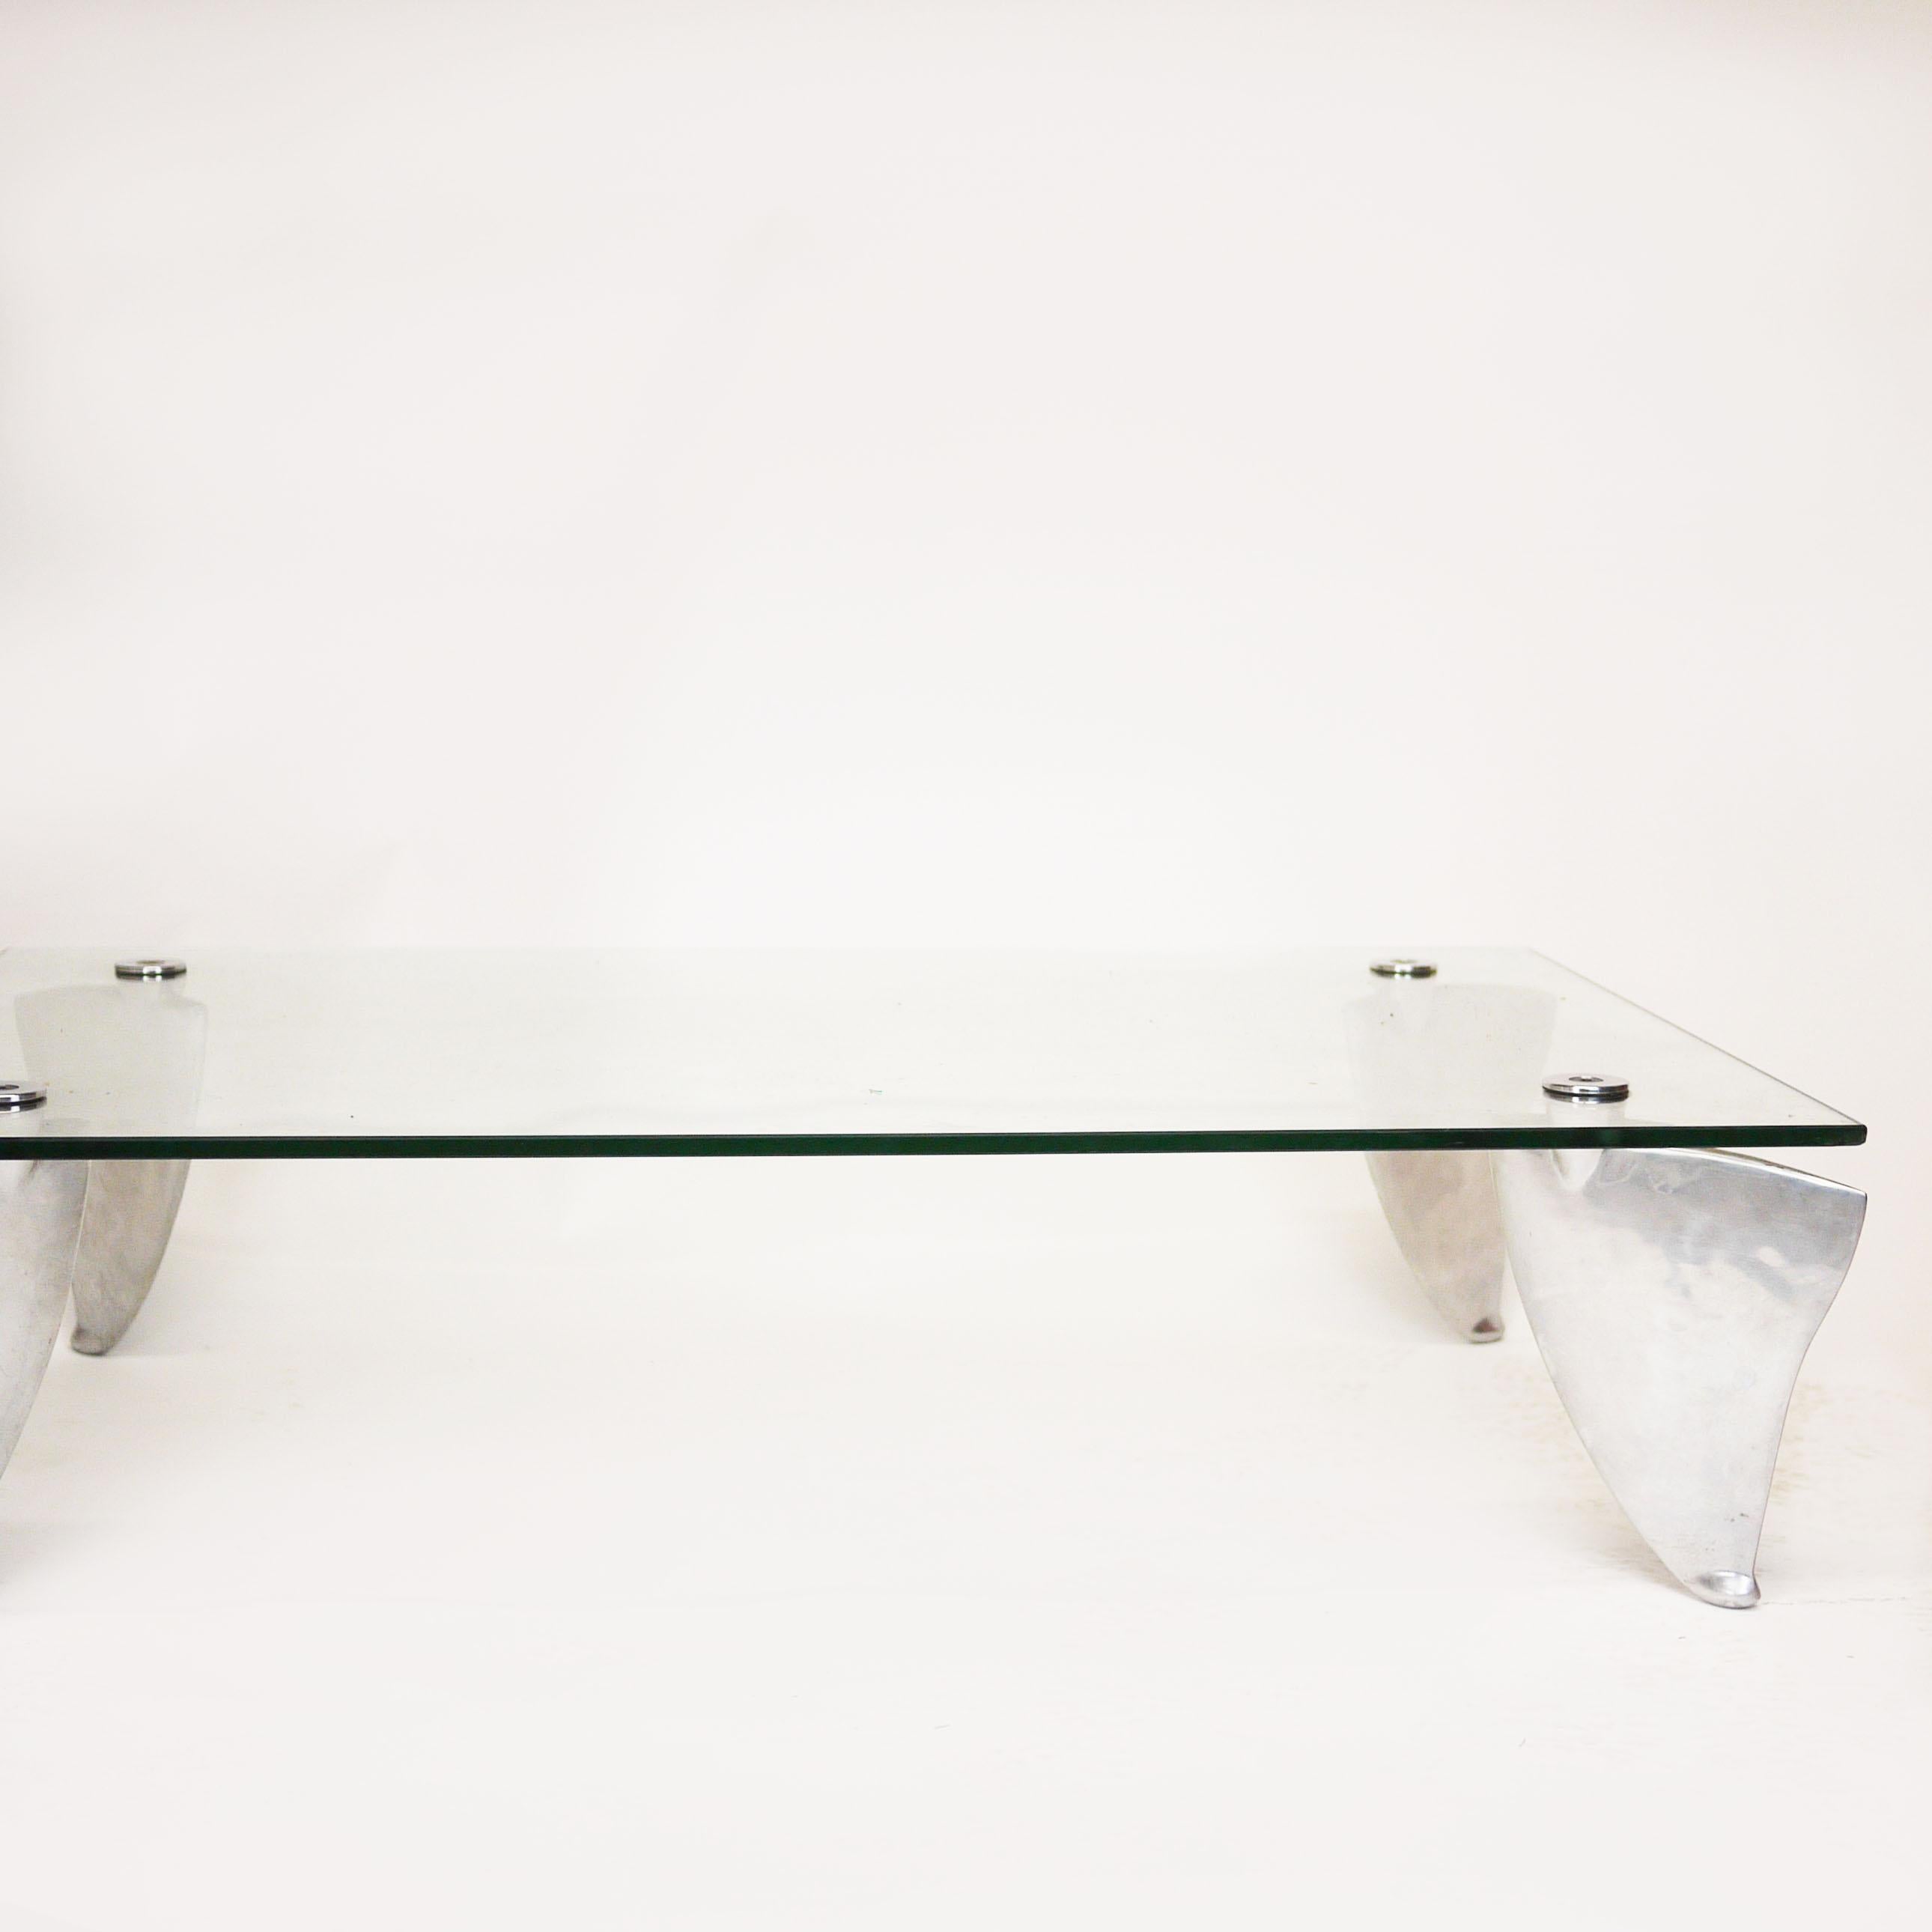 Vintage Glass and Aluminum 'Fipper' Coffee Table by Matthew Hilton for SCP, 1980 For Sale 6